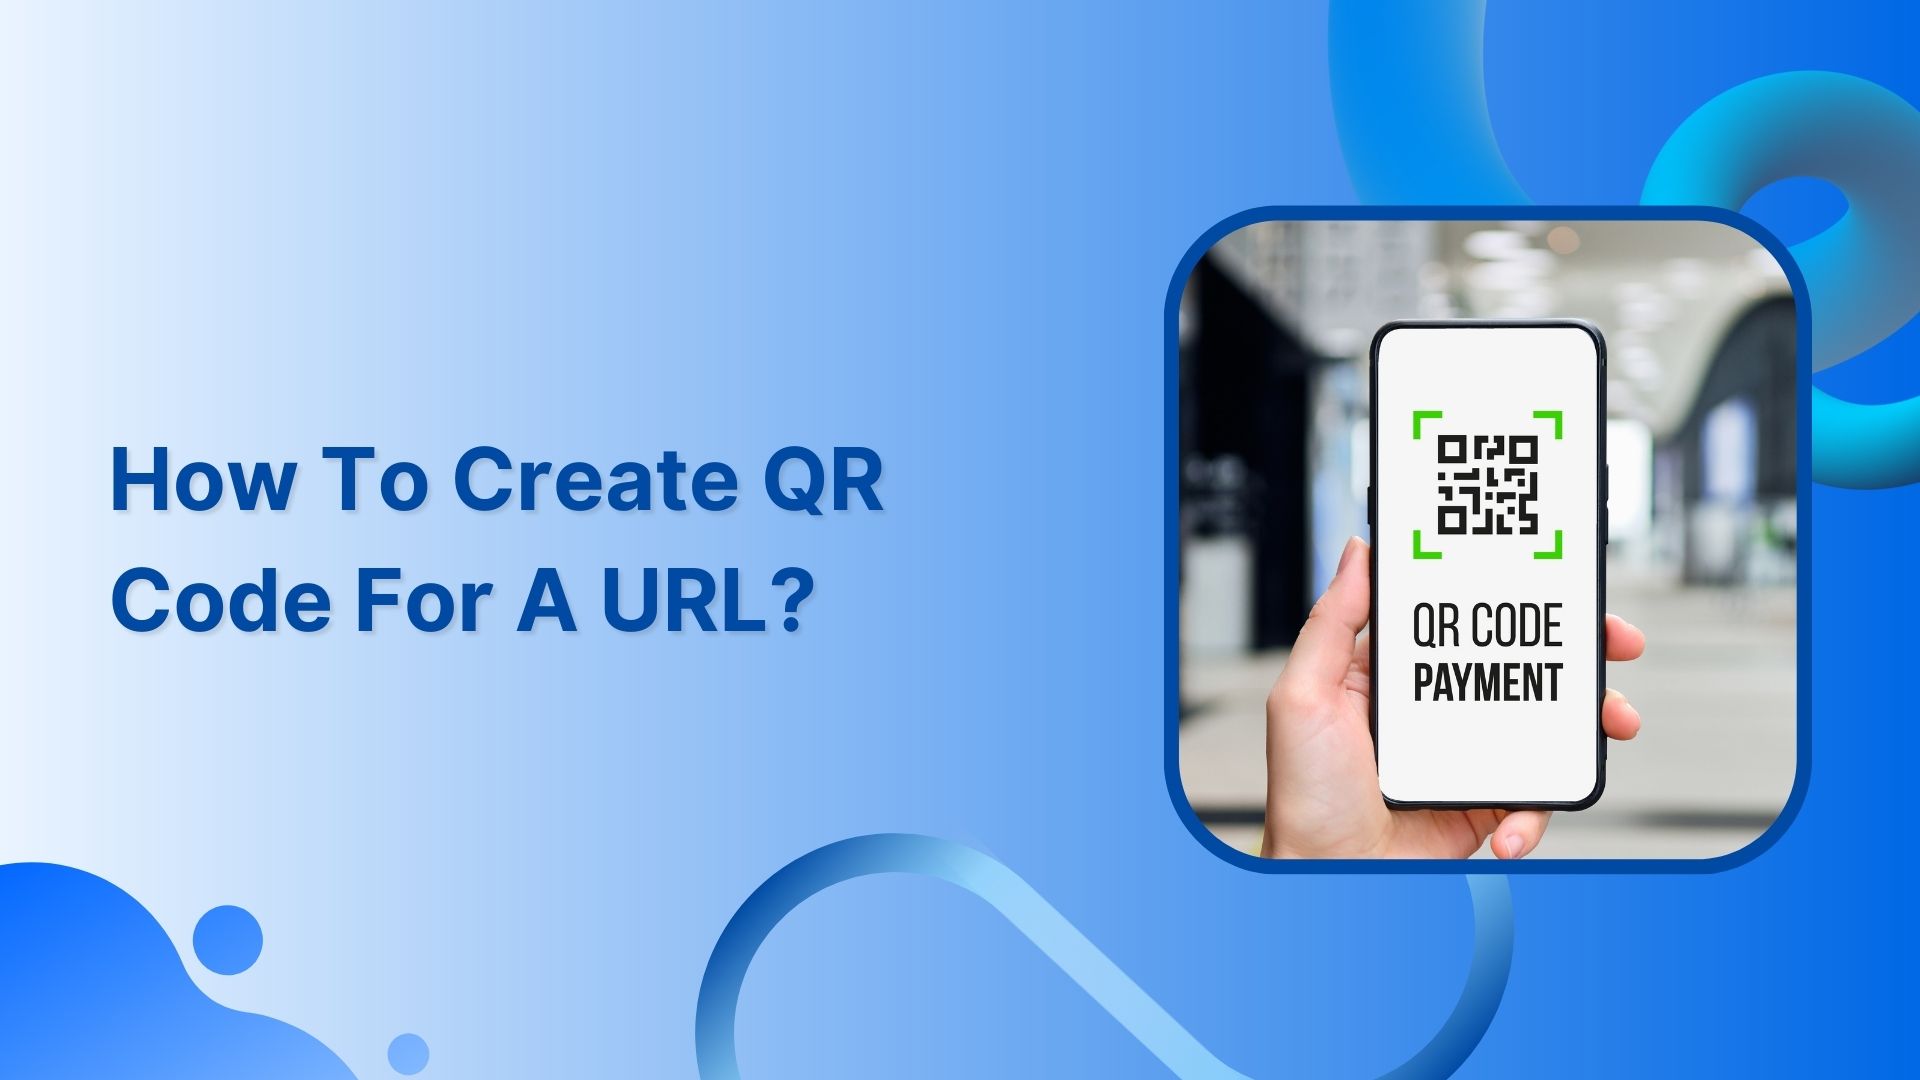 How to create a QR code for a URL?